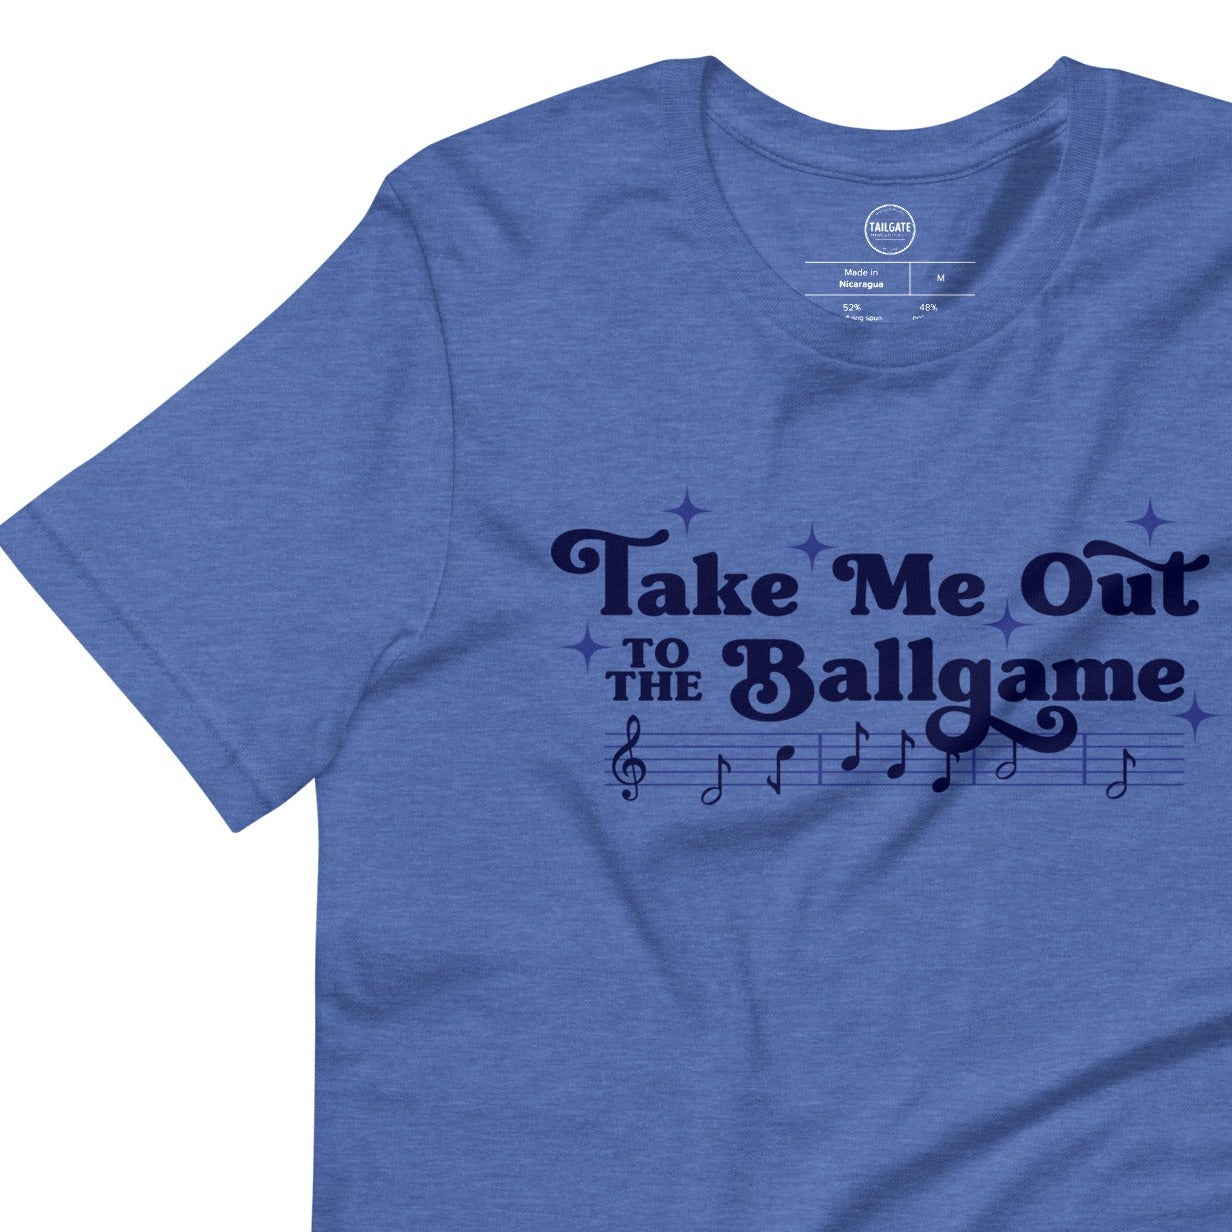 Image of heather royal blue t-shirt with design of "Take Me Out to the Ballgame" with coordinating musical notes in navy located on centre chest. This design is exclusive to Tailgate Mercantile and available only online.